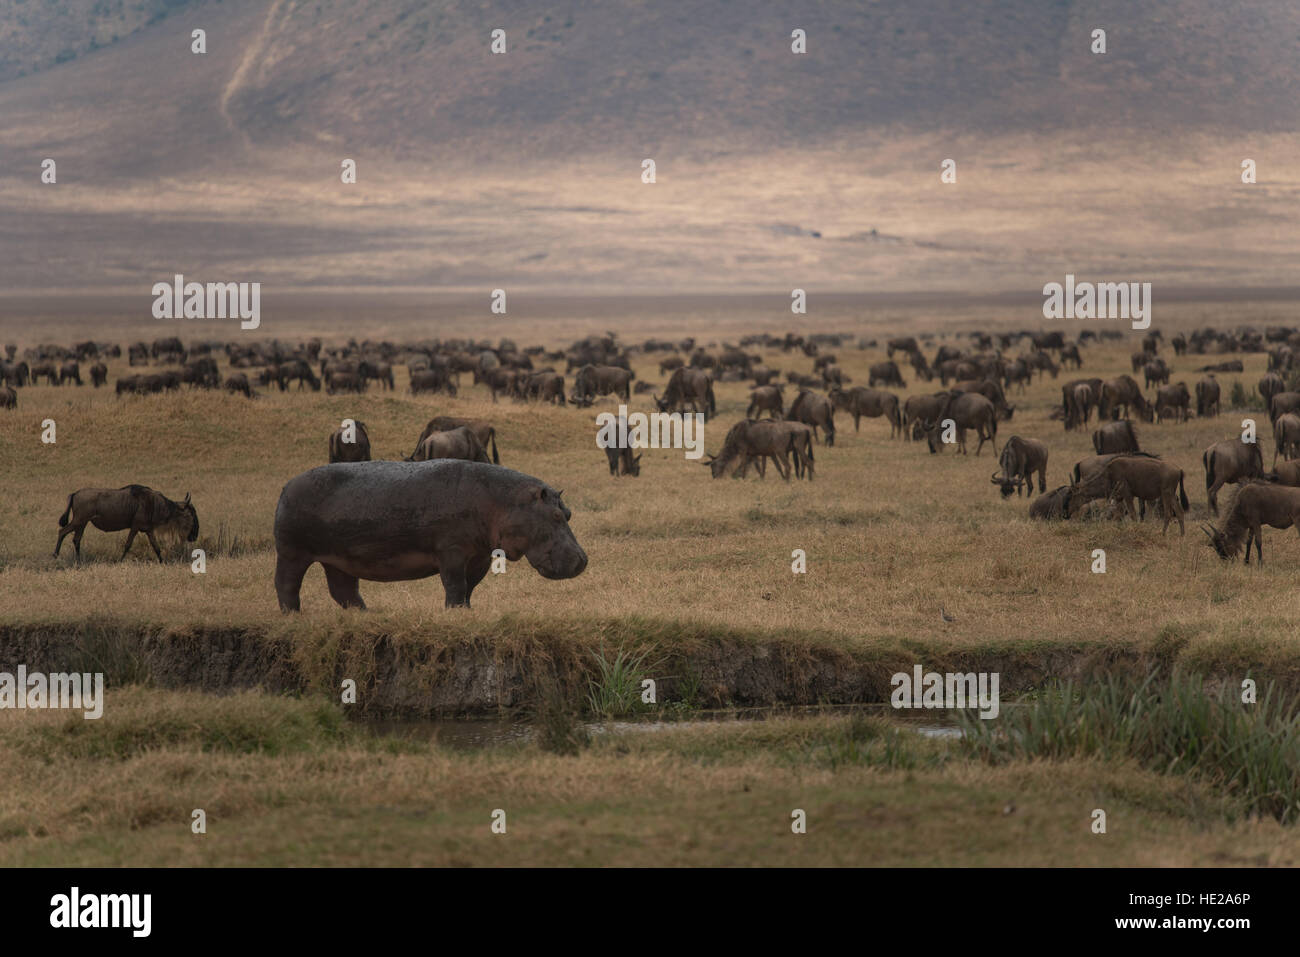 Hippo and hundred of wildebeest grazing in the Ngorongoro crater. The dry season is not yet finished. Stock Photo